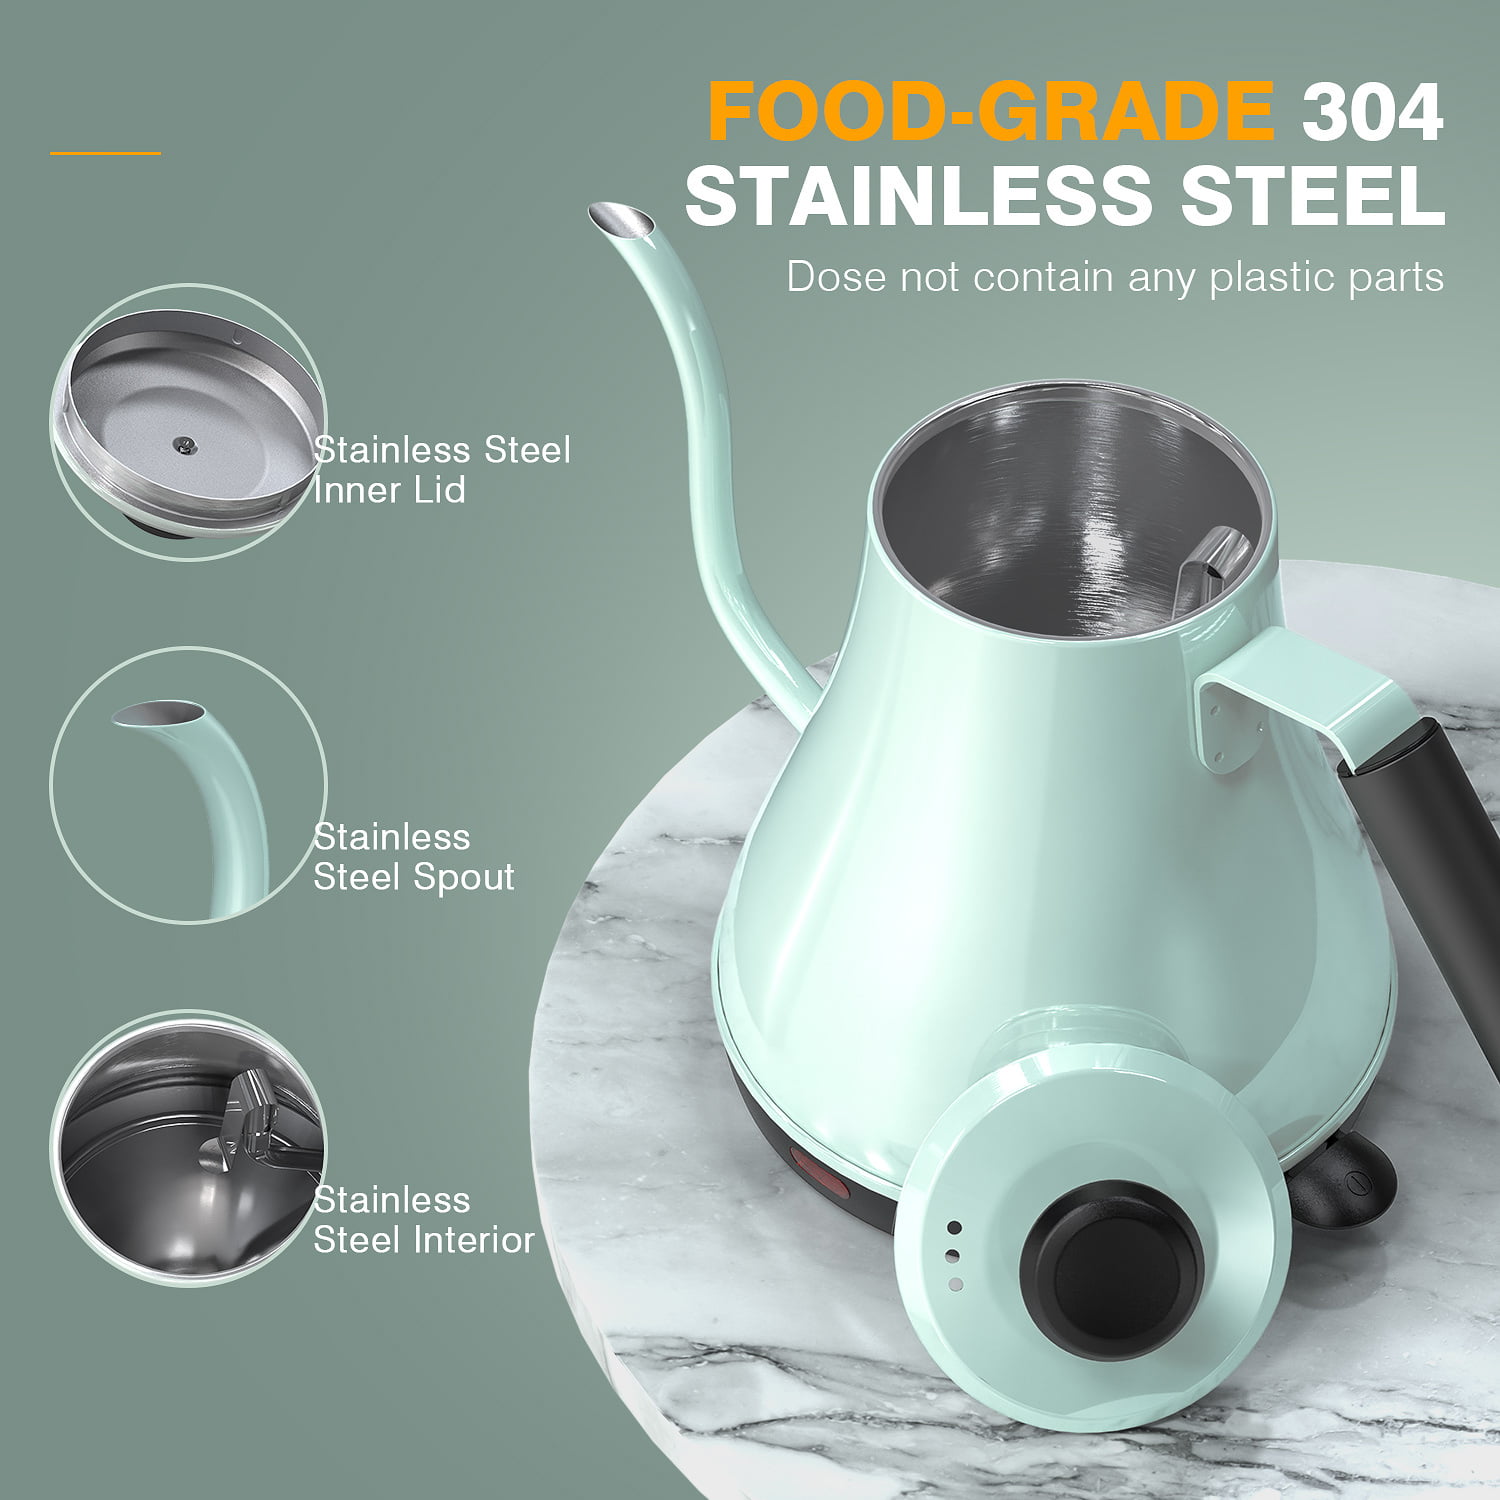 Electric Kettle, Pour Over Coffee Kettle & Tea Kettle 100% Food Grade Stainless Steel Interior Water Boiler, Coffee Pot, Auto Shut-Off and Boil-Dry